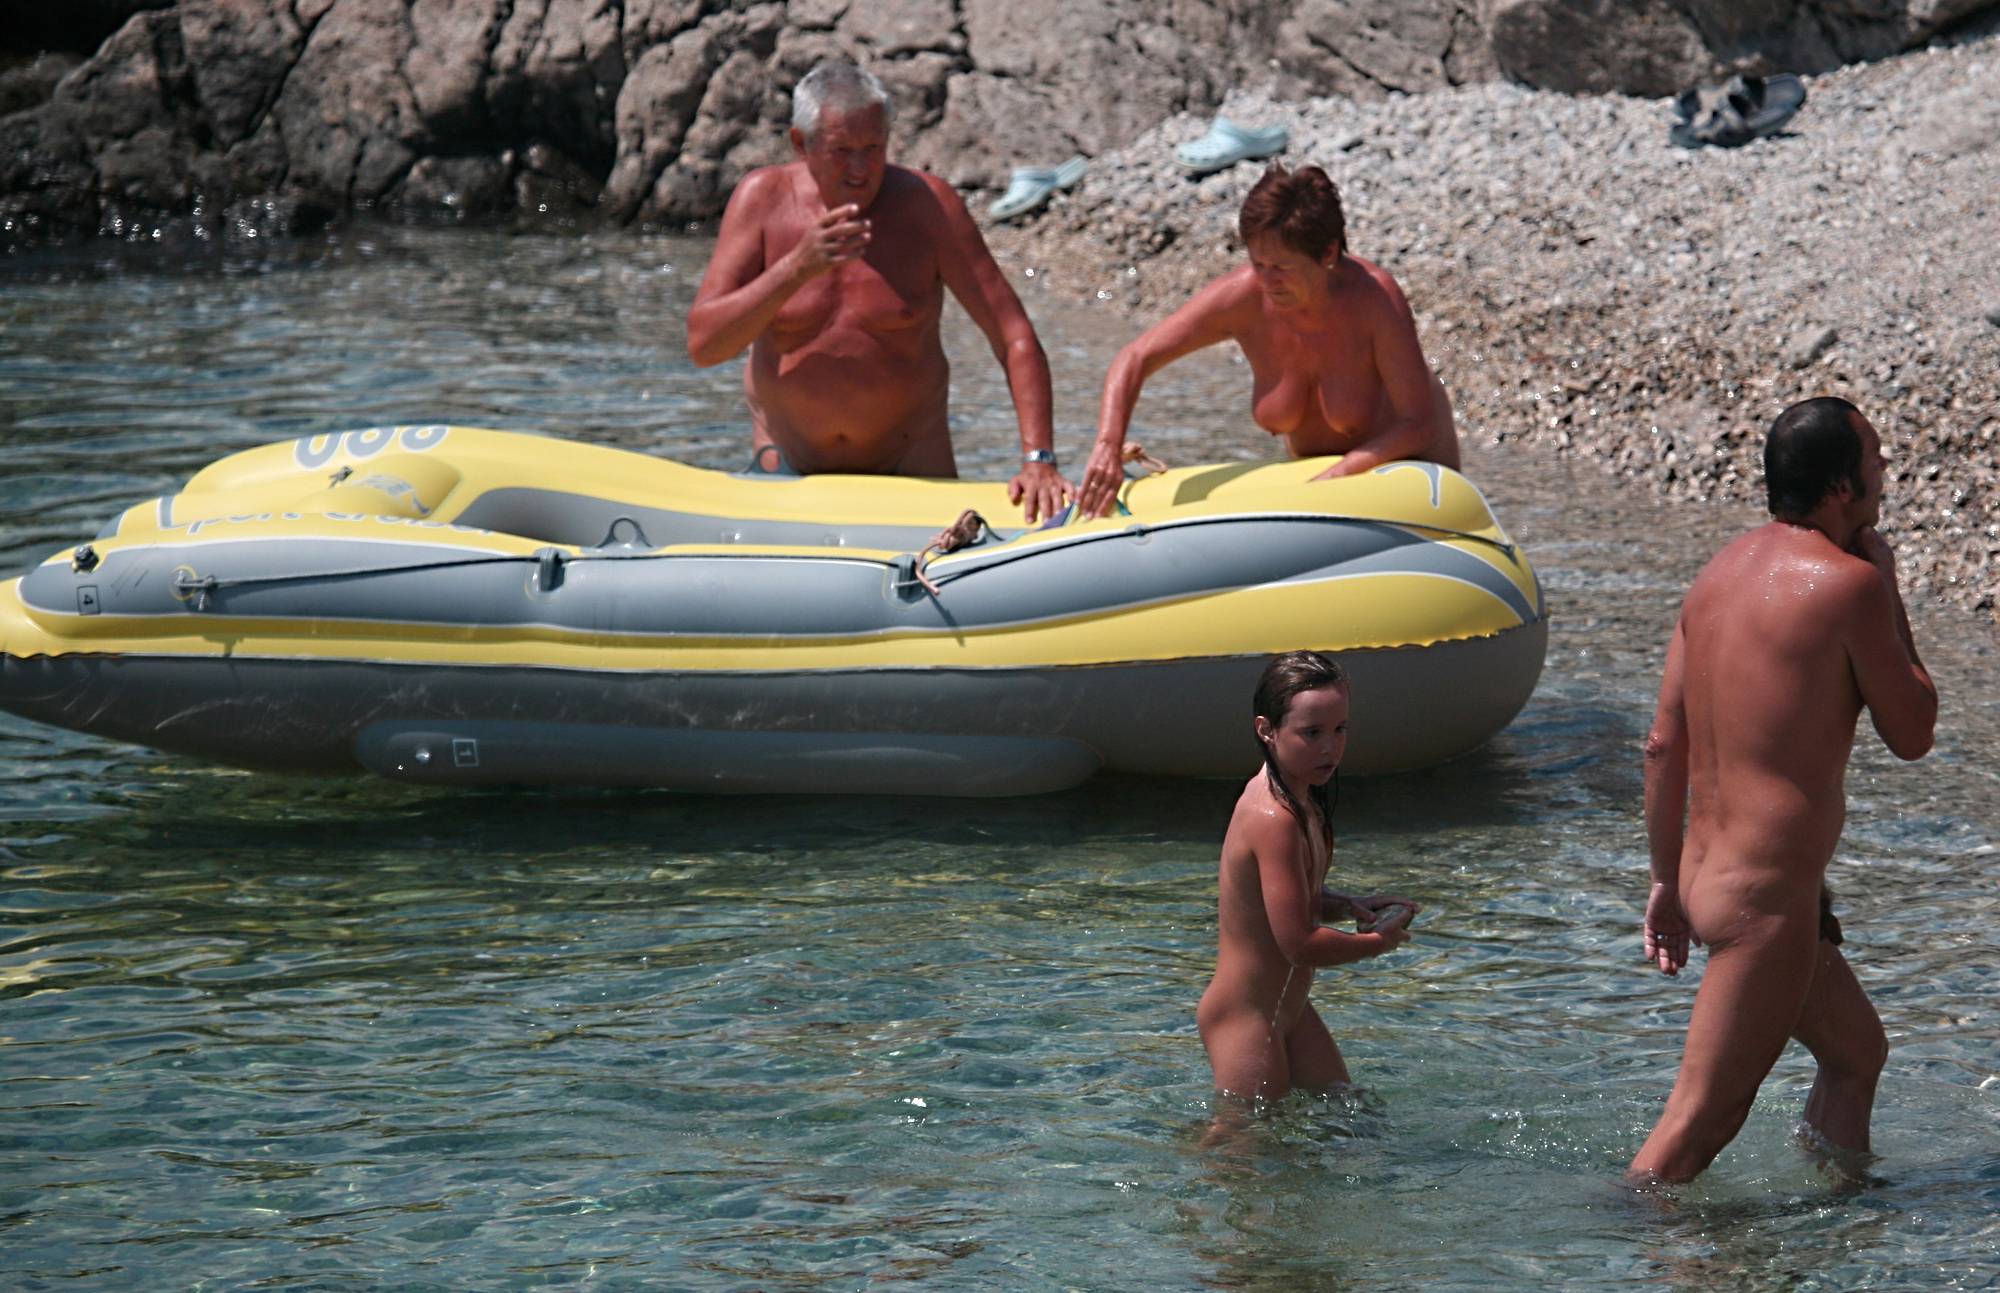 Pure Nudism Images-Lone Nudist in Yellow Boat - 1